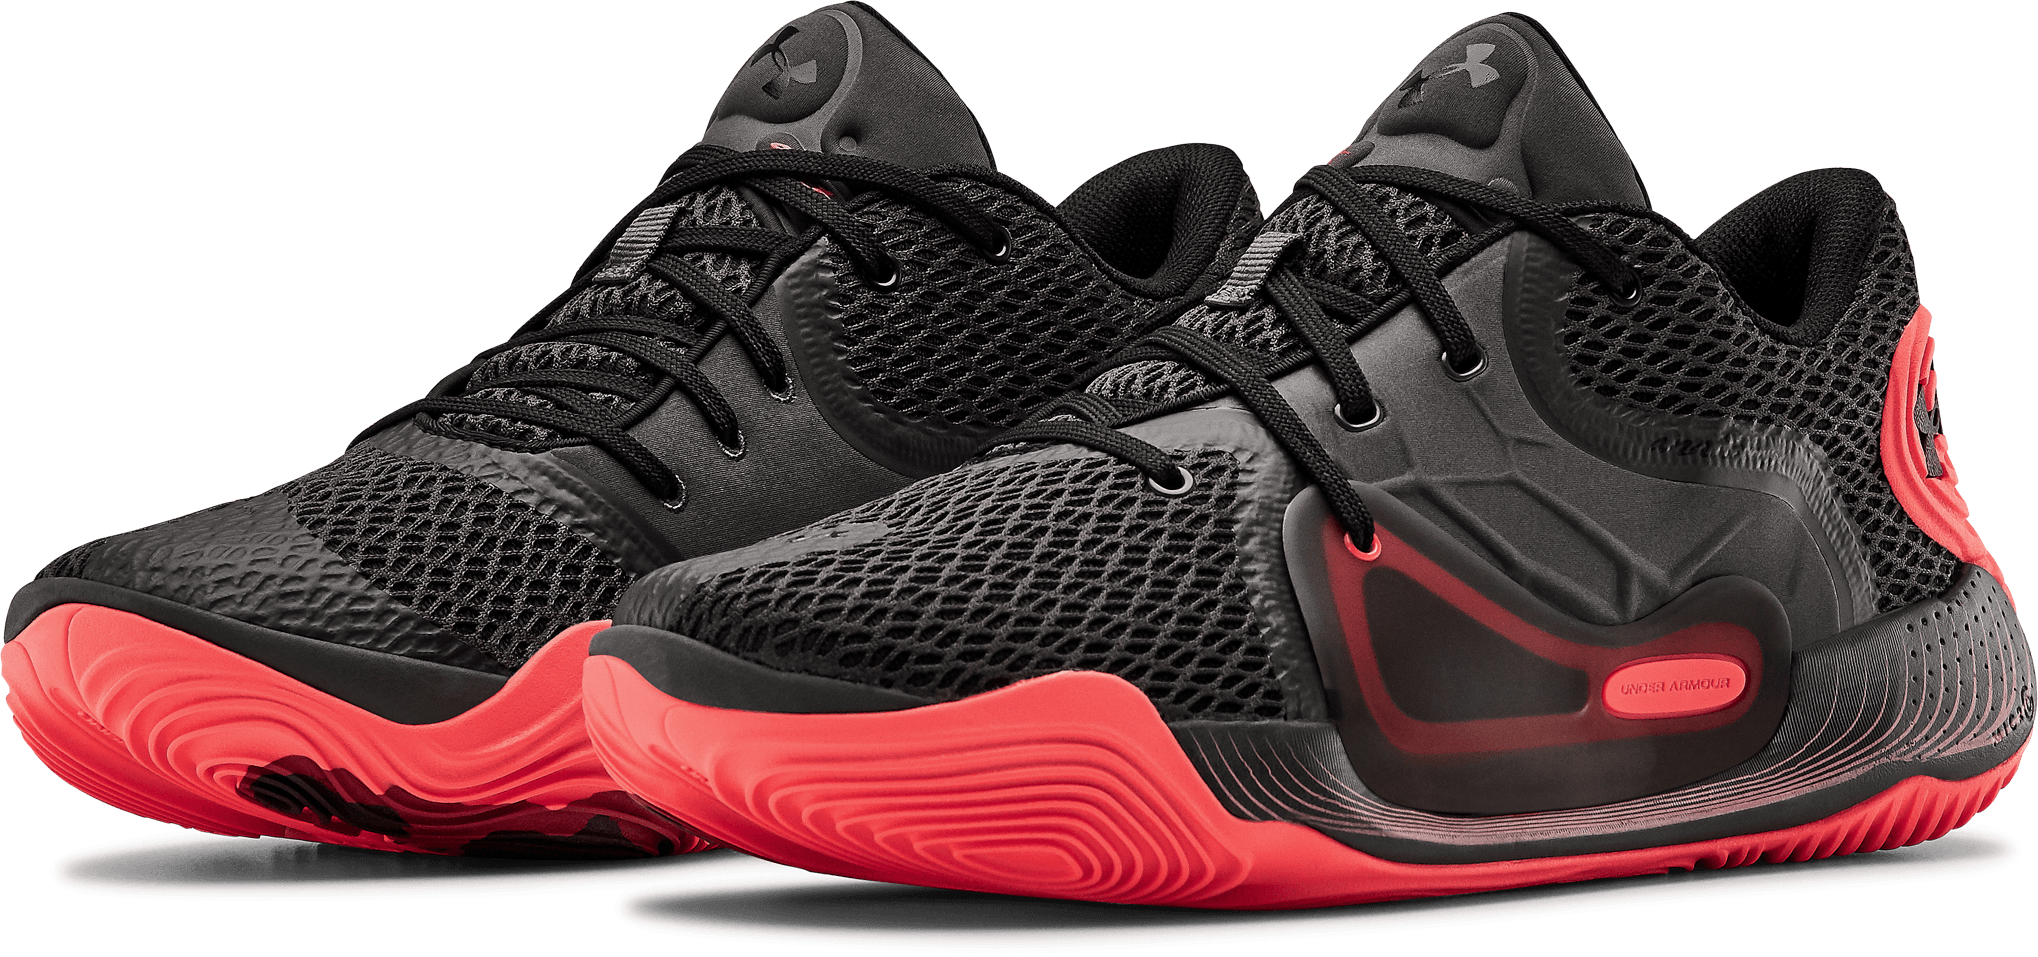 under armour anatomix spawn review